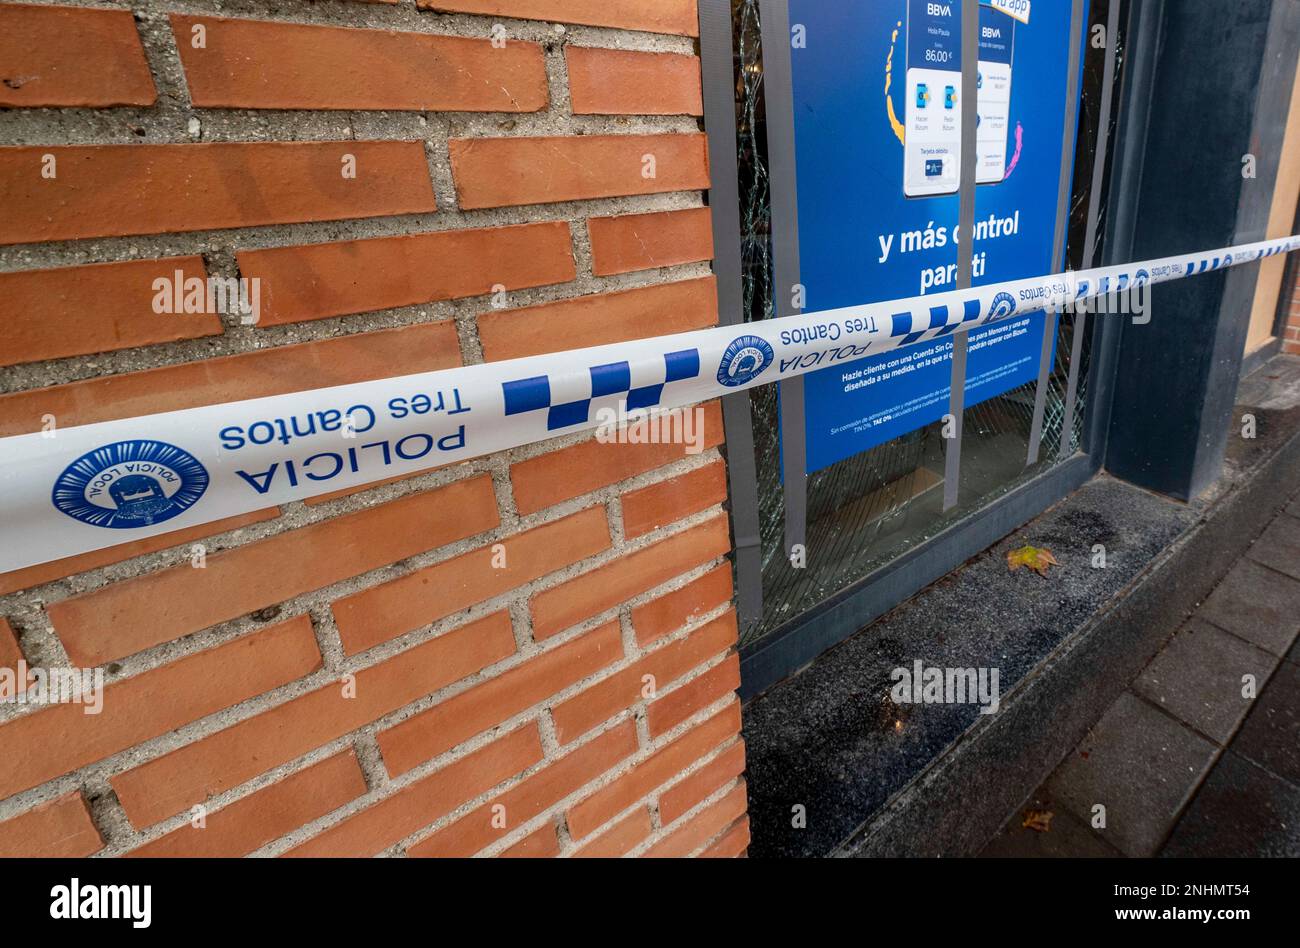 A National Police tape surrounds a BBVA ATM after it was blown up with  explosives, Dec. 9, 2022, in Tres Cantos, Madrid (Spain). A group of  thieves took yesterday, December 8, a